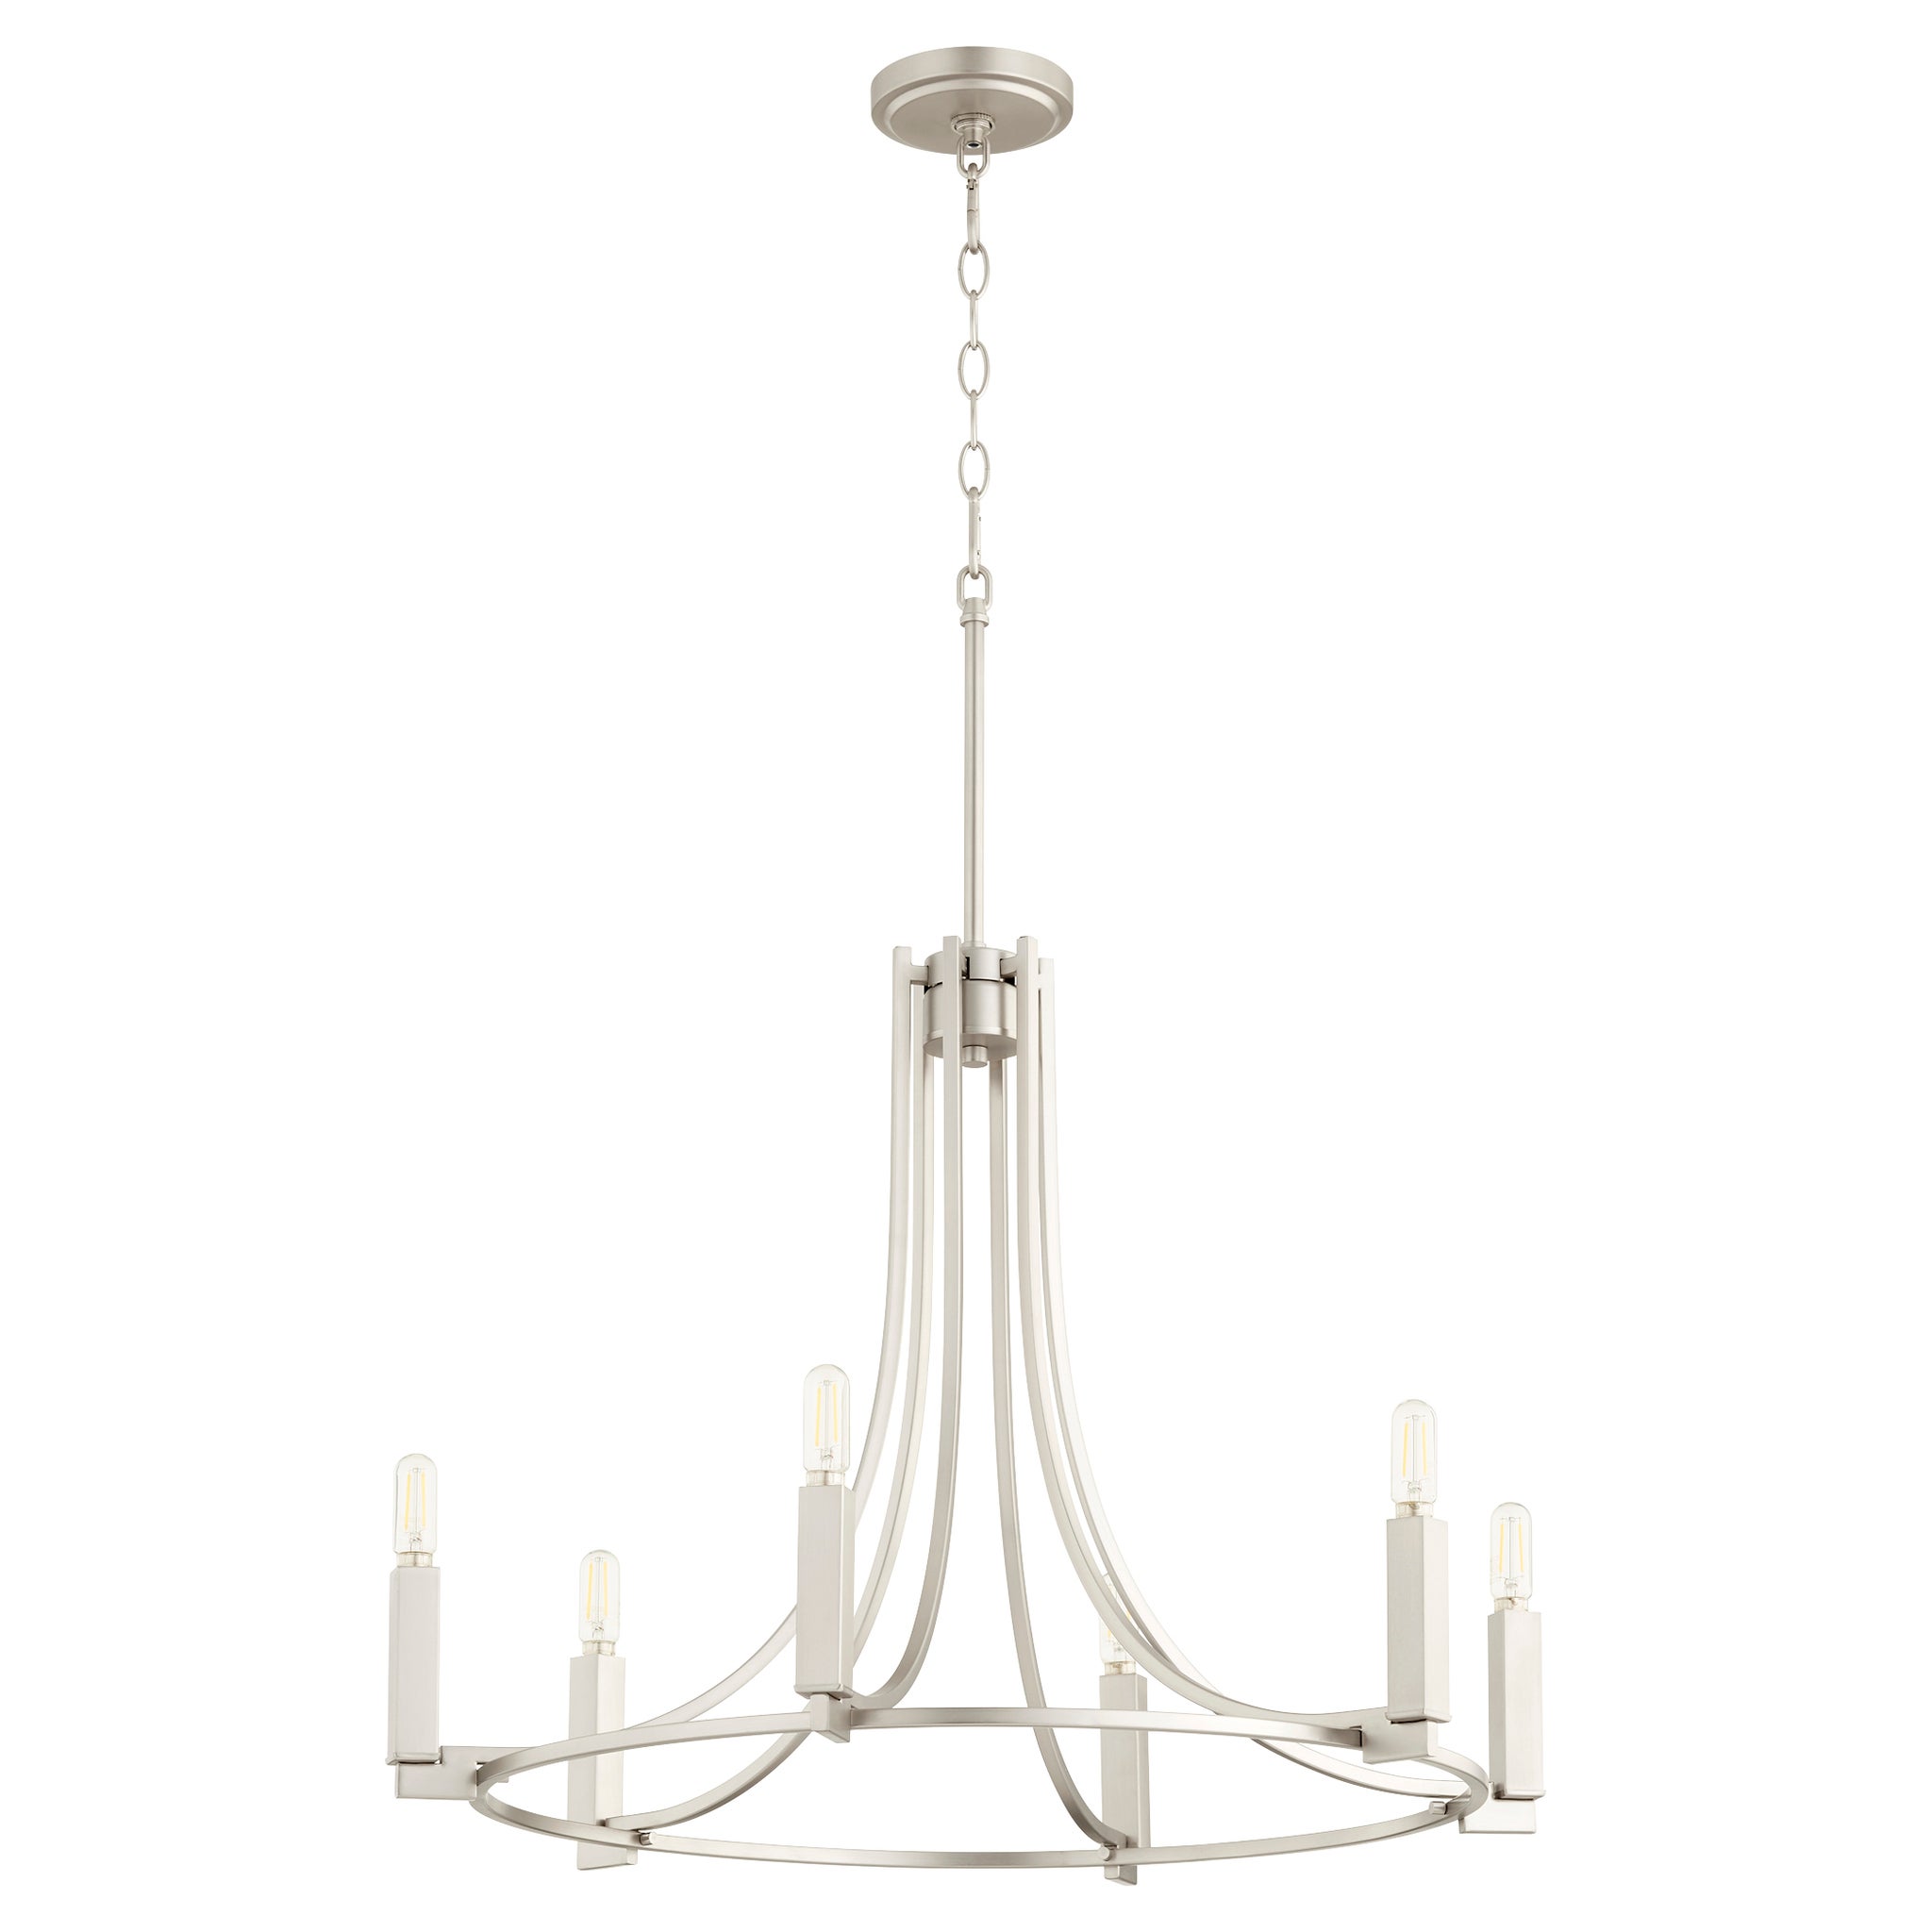 Quorum International 6/14/6040 L7 Collection 6-Light Chandelier 29.5 x 13 x 8.2 Chrome Finish with Satin Opal Glass 